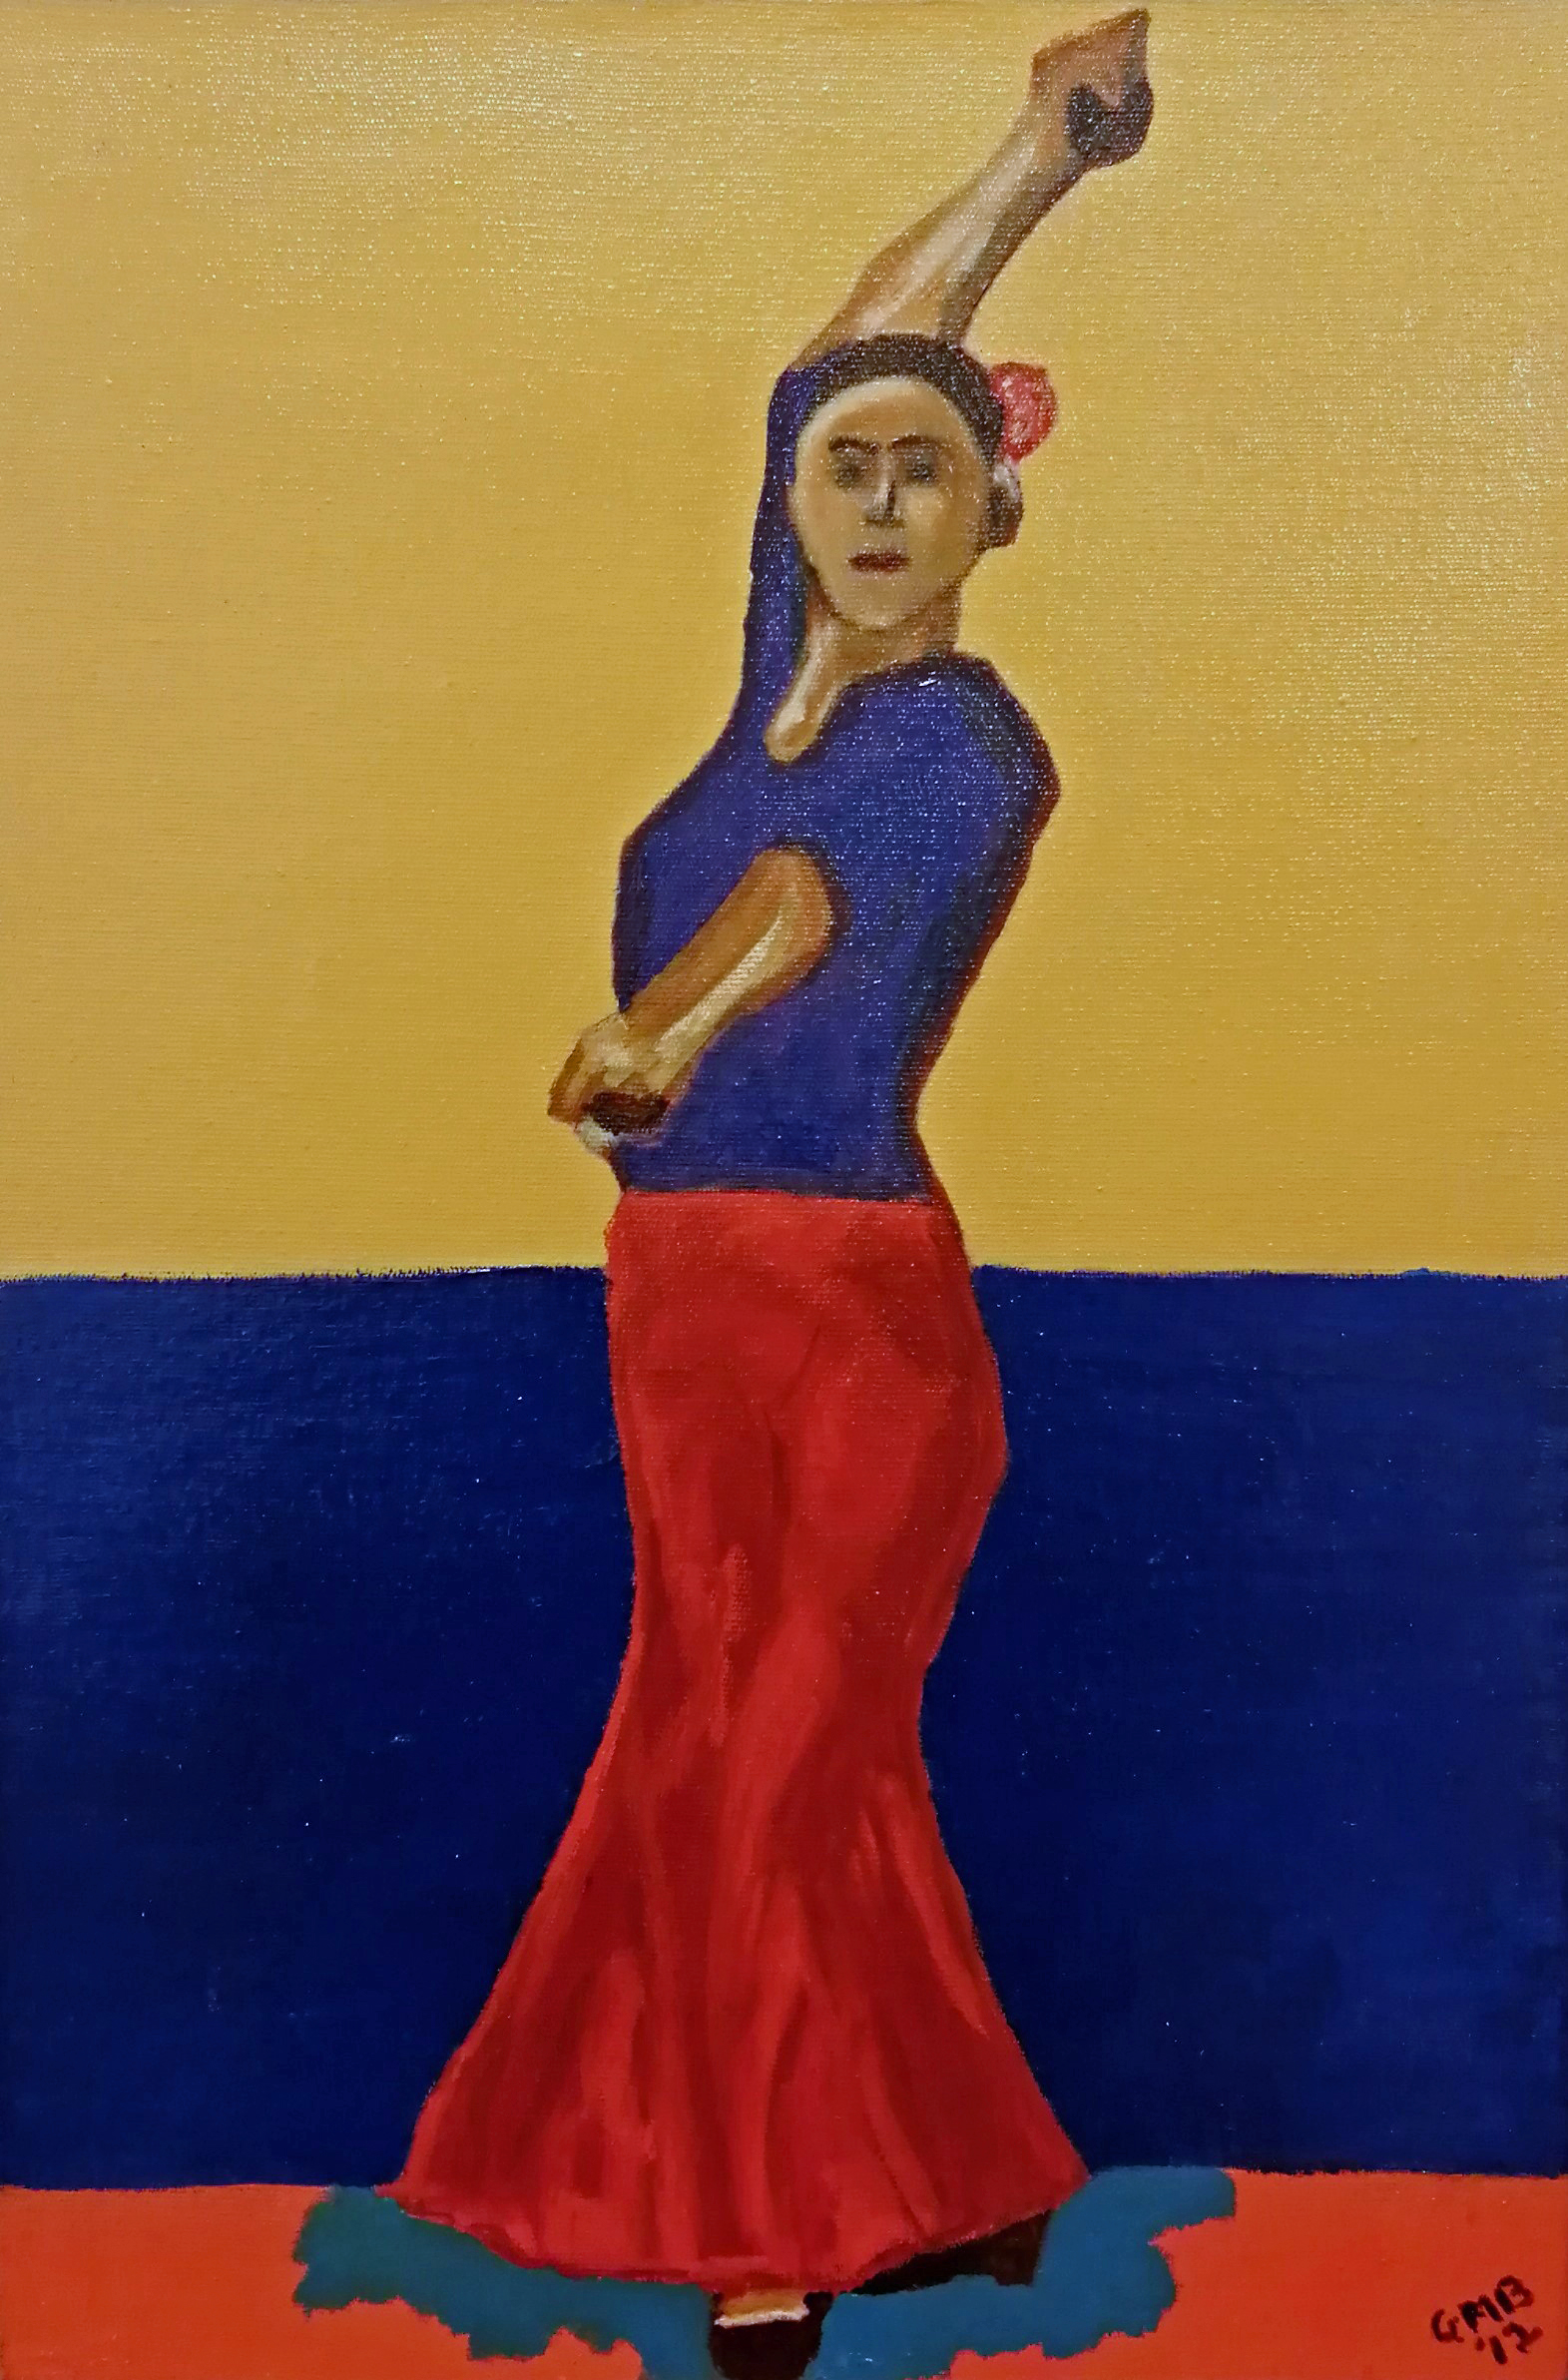 A flamenco dancer is an abstract oil painting of a flamenco dancer using blues, yellows, reds, and oranges in the style of Matisse.